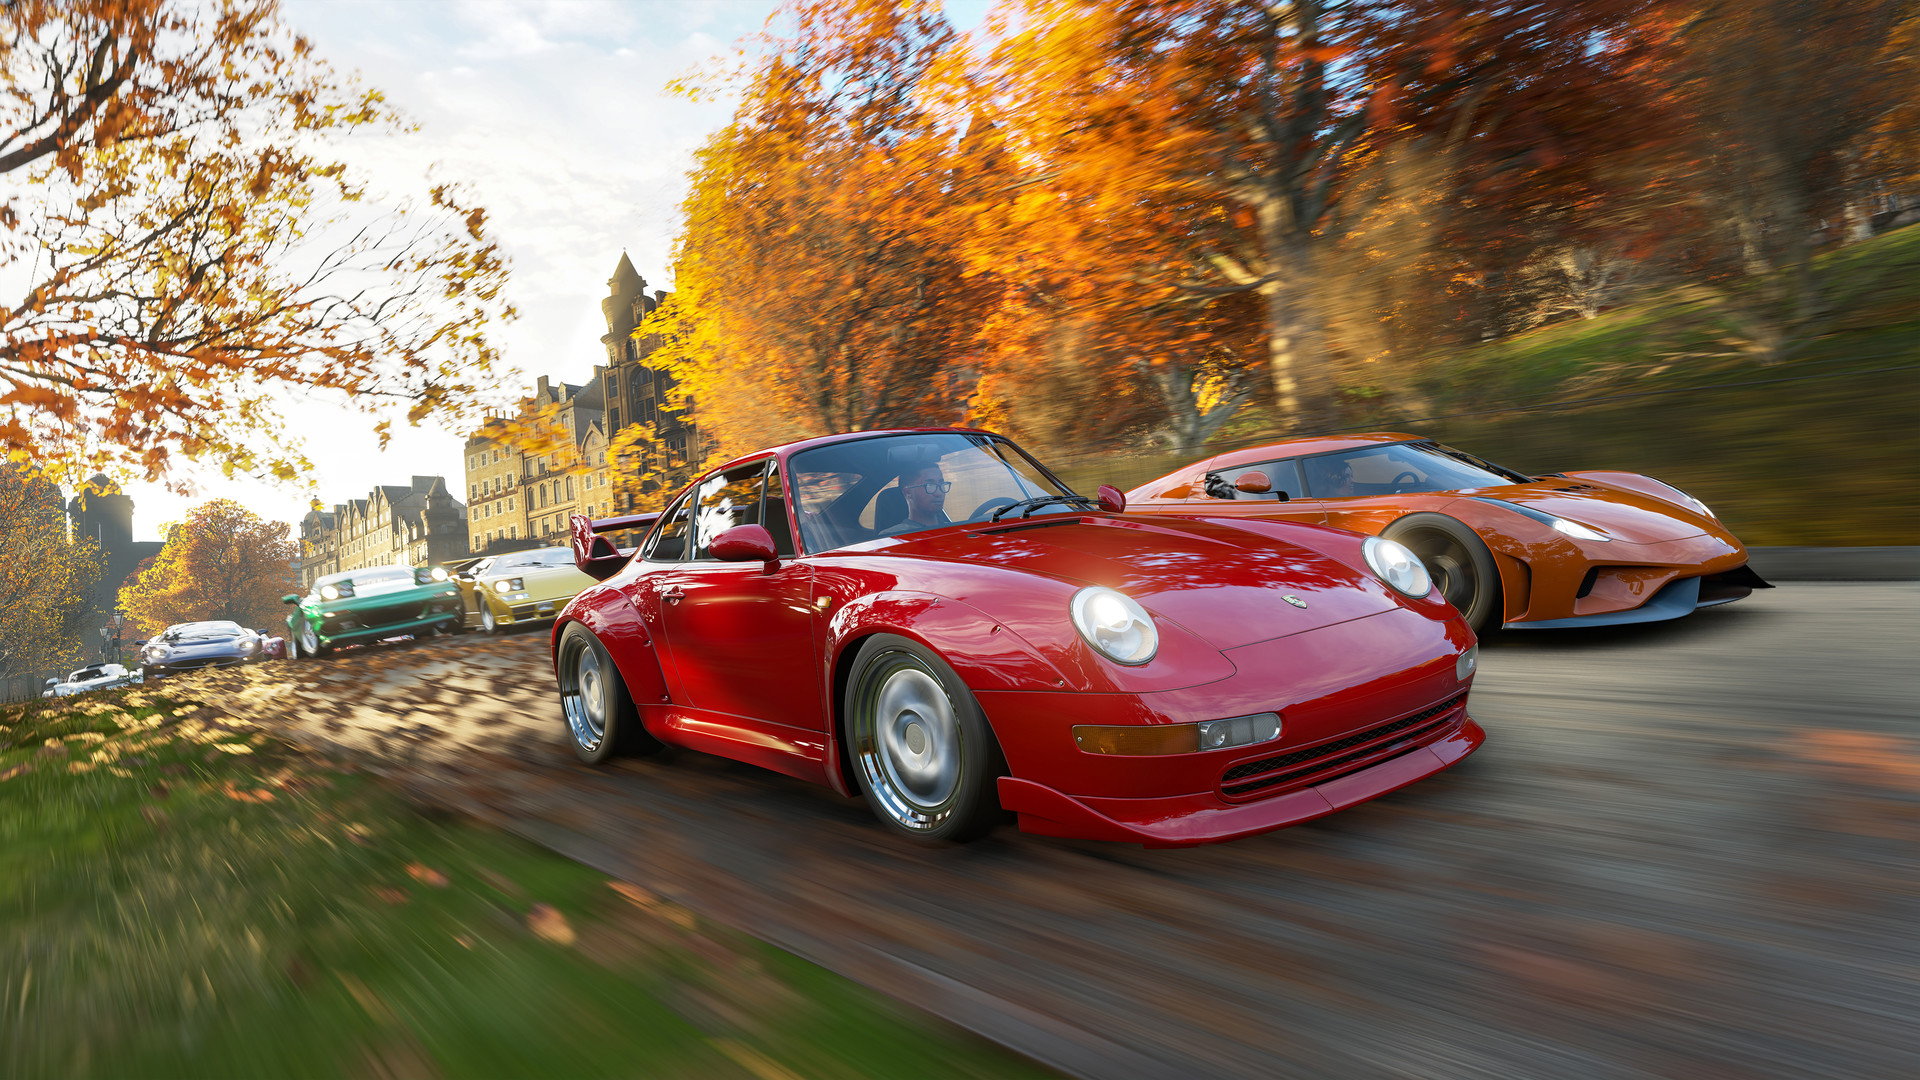 24 million people have played Forza Horizon 4 - Successful Steam launch -  XboxEra